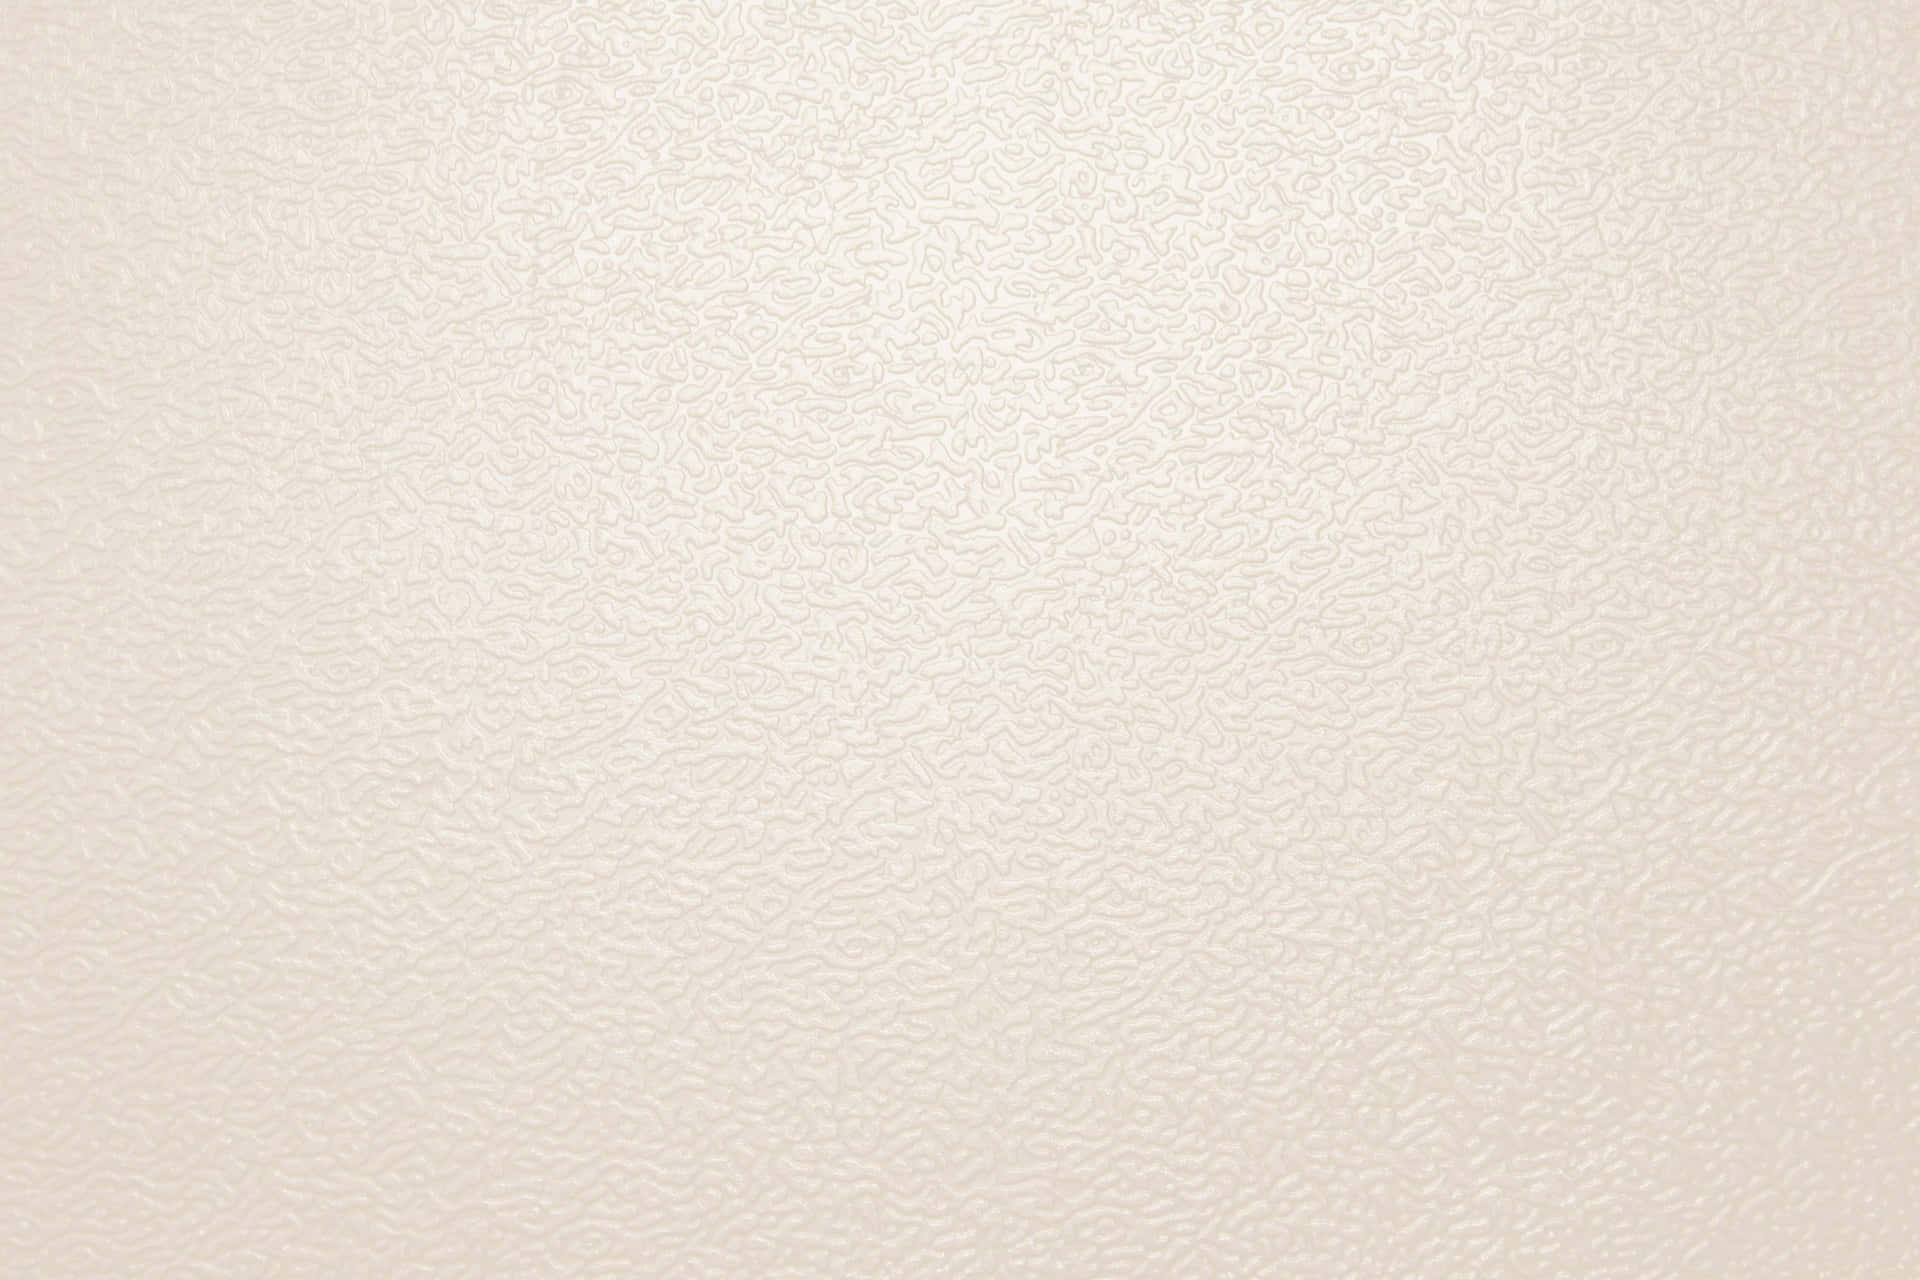 Cream Color Background Small Details